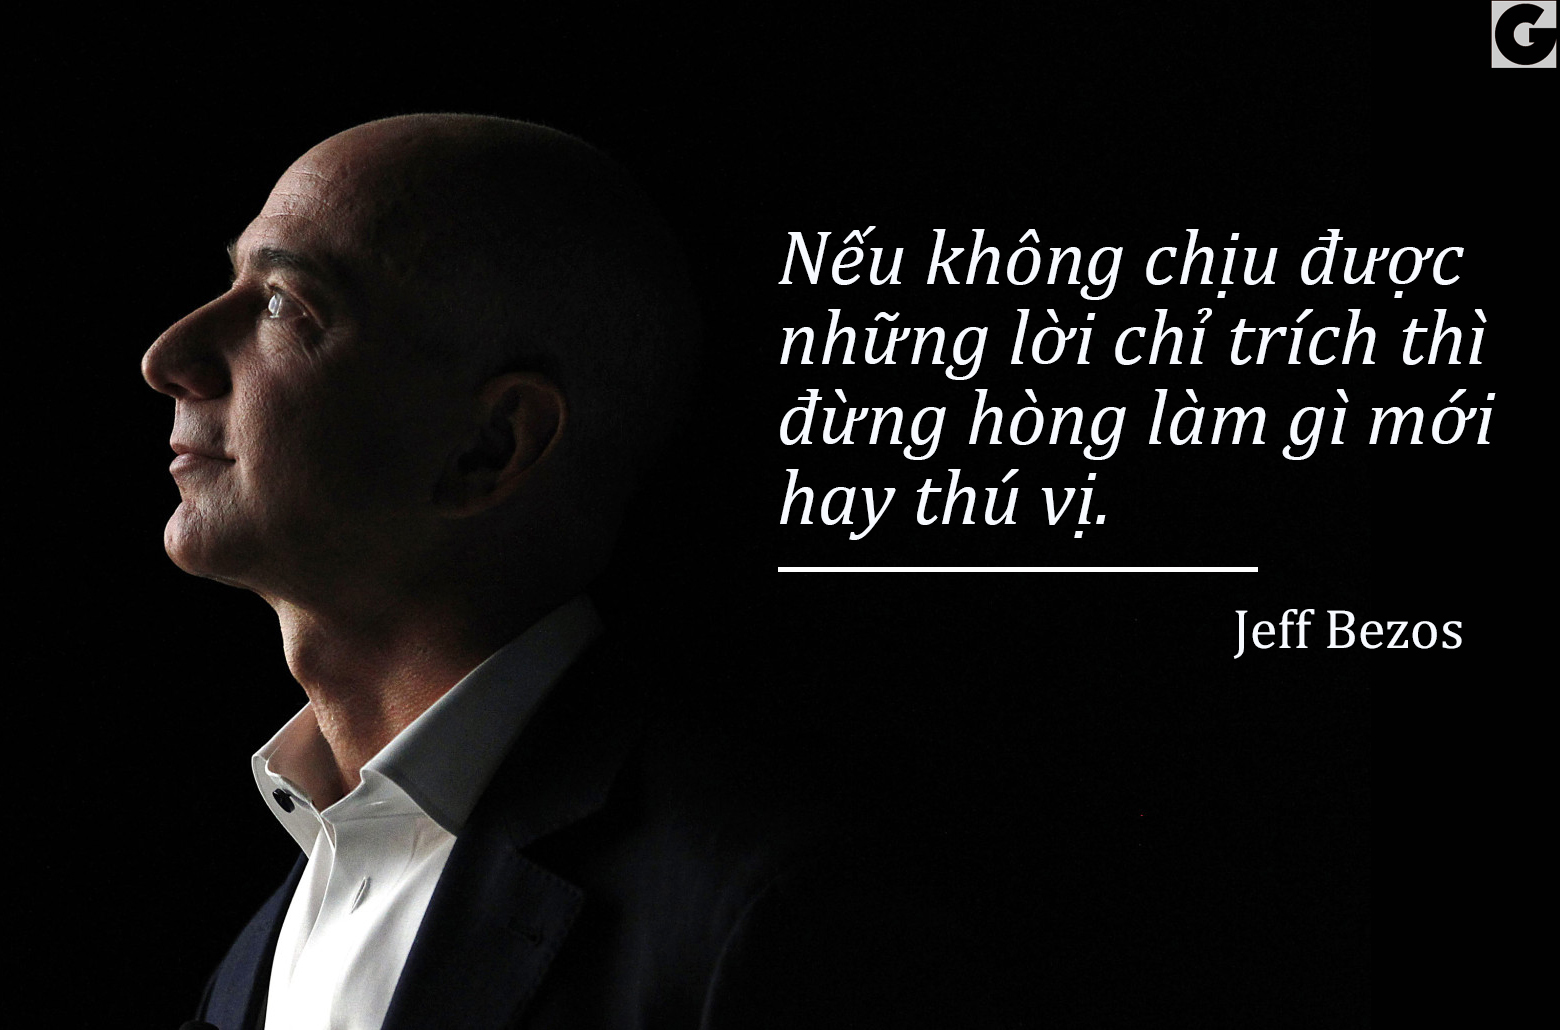 triet ly thanh cong jeff bezos 7